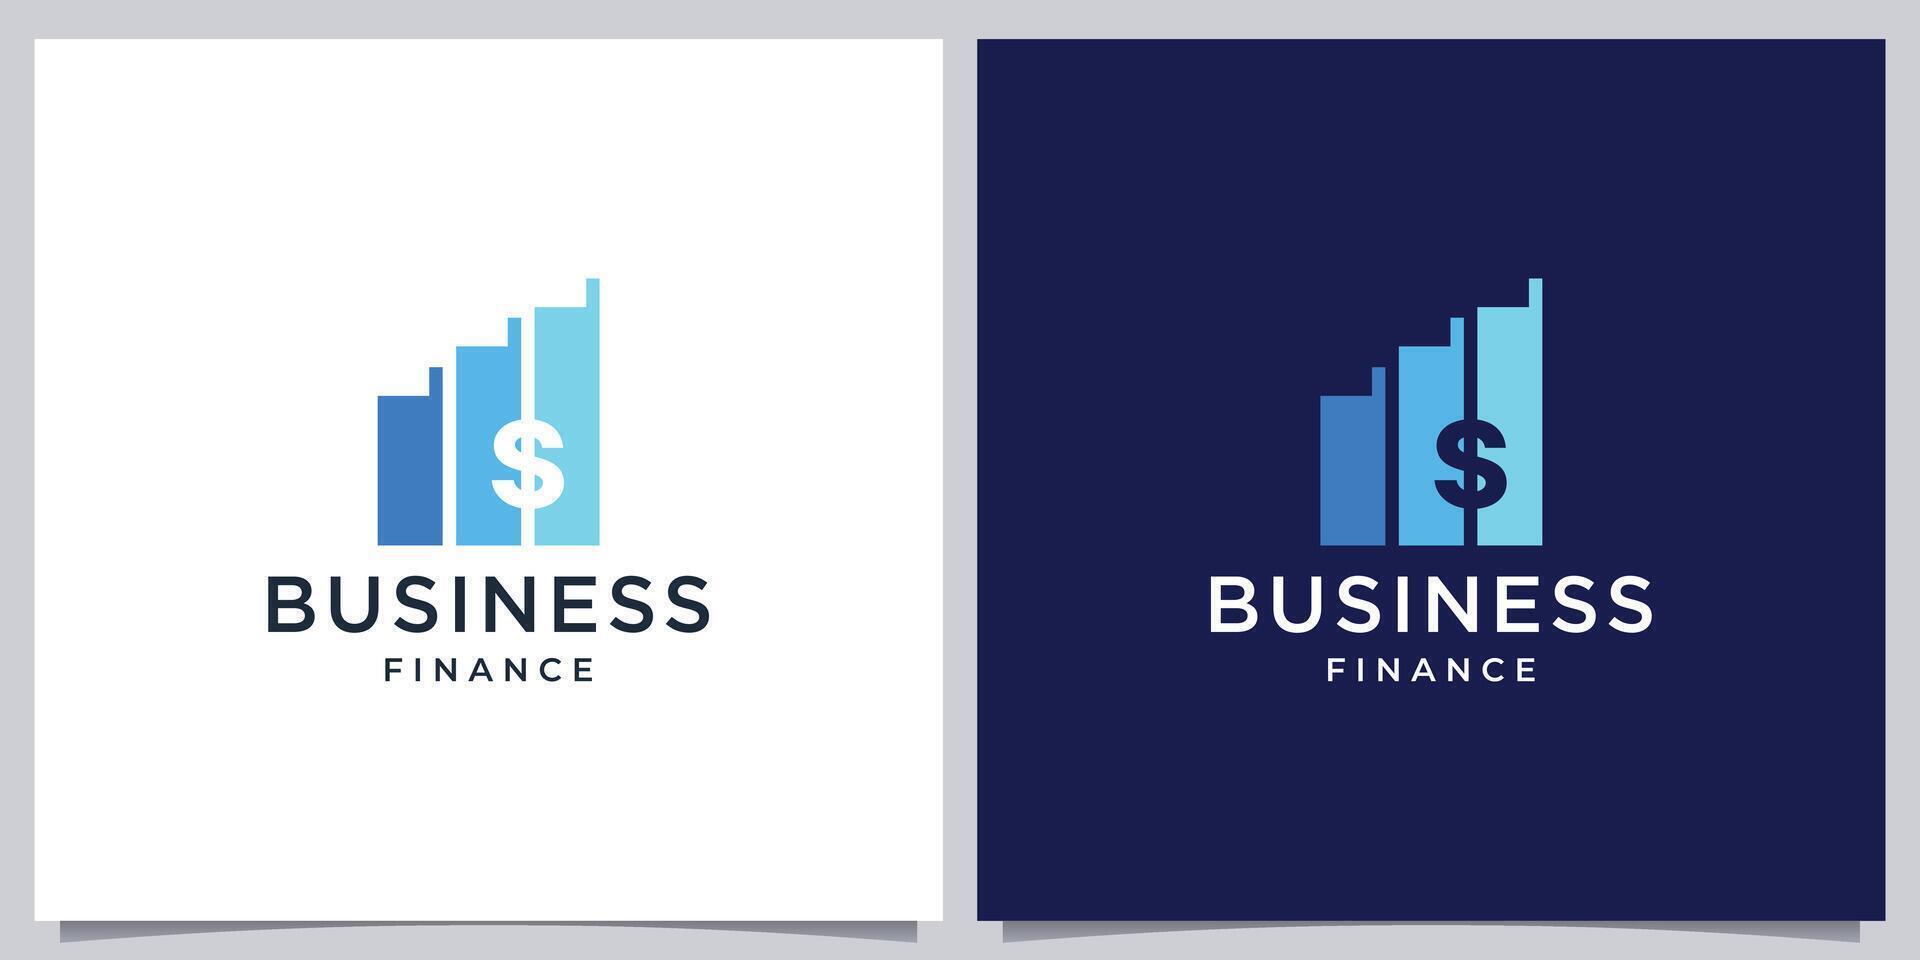 Business Finance and Accounting Logo Design Vector inspiration. Premium concept for business